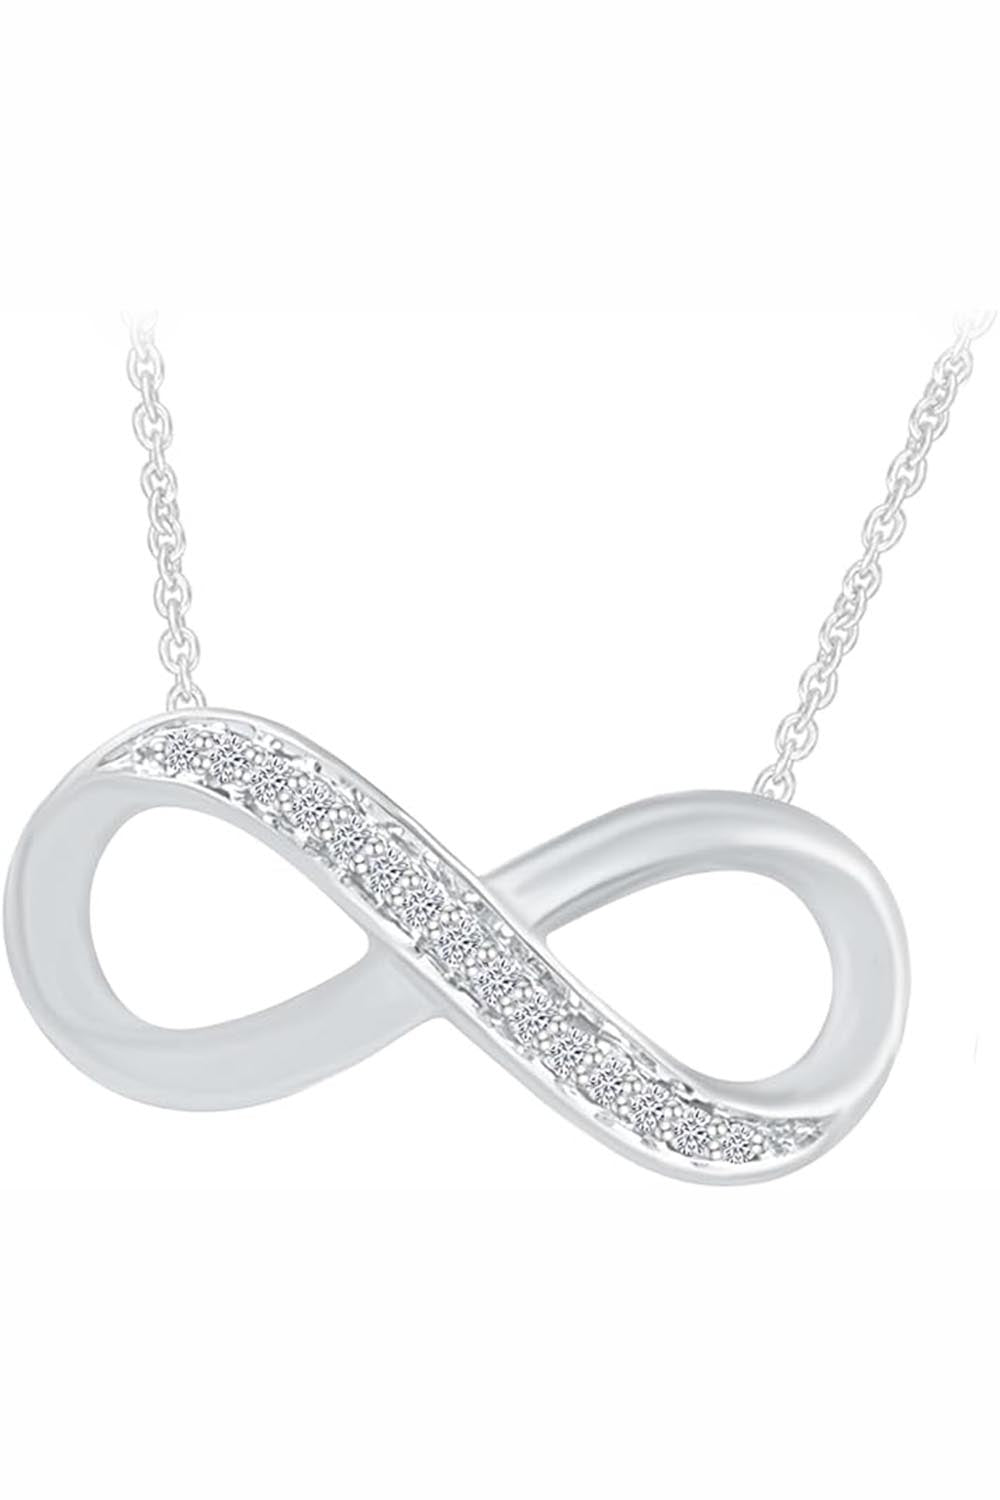 White Gold Color Yaathi Infinity Necklace, Women's Pendant Necklace